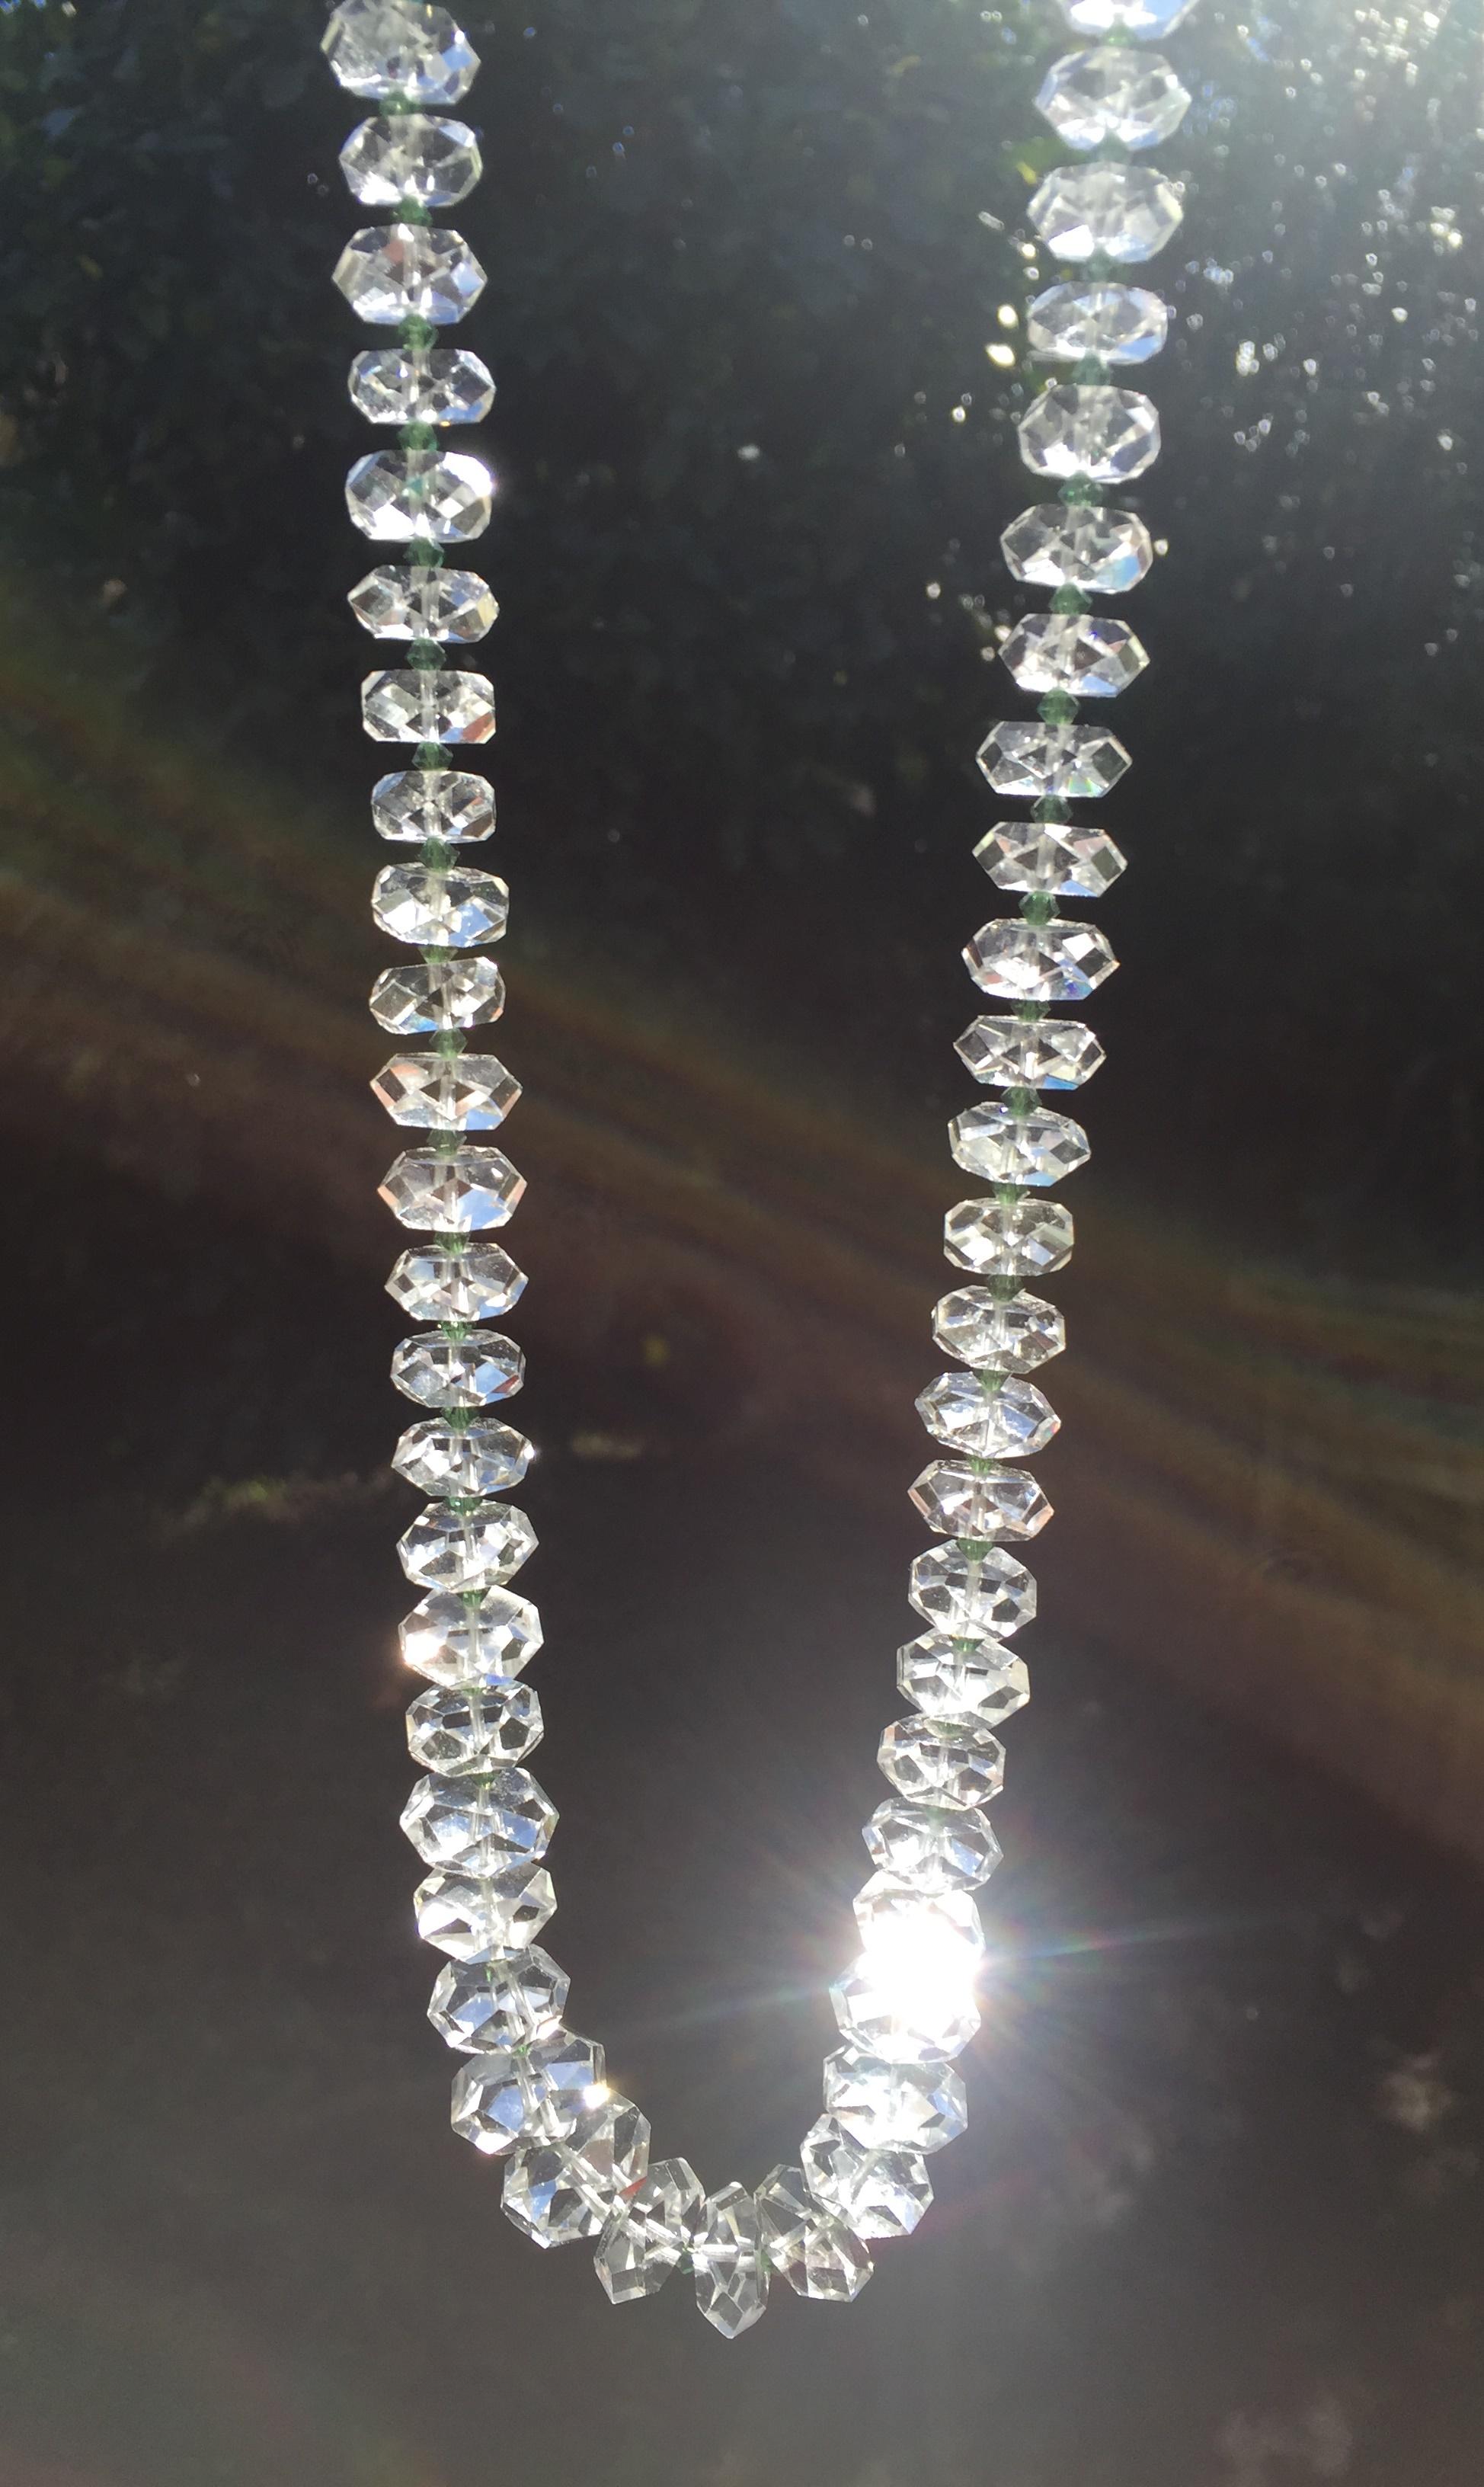 Offered here is a massive Edwardian genuine rock crystal necklace in a classic opera length, Circa 1910. It consists of a continuous strand of perfectly graduated discs of hand-faceted rock crystal; between each of the discs is a tiny bicone emerald